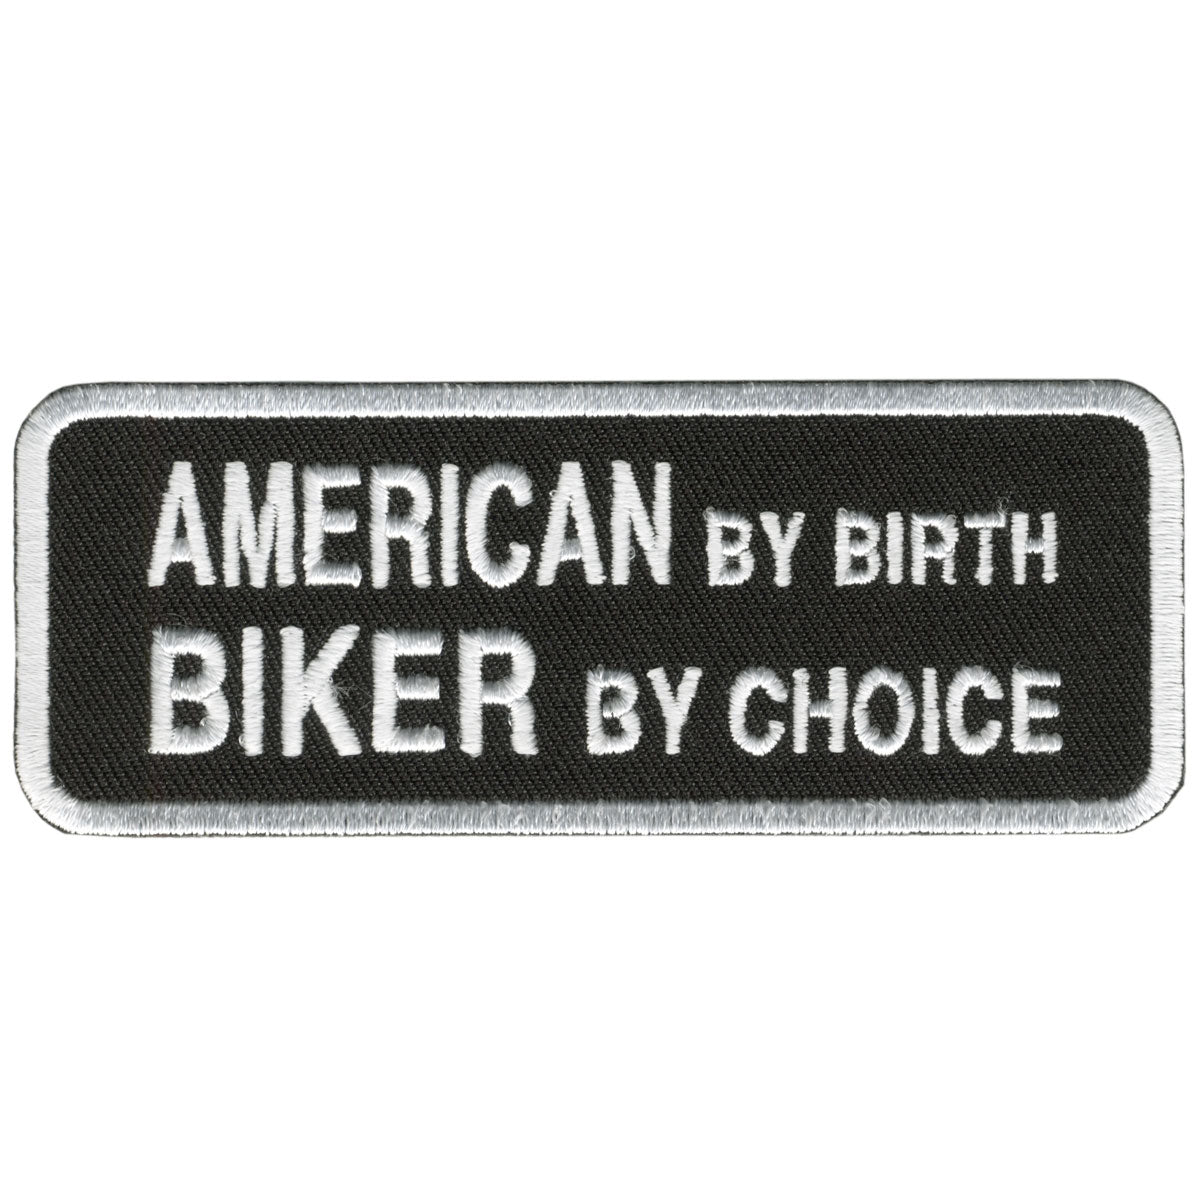 PATCH AMERICAN BIKER BY CHOICE